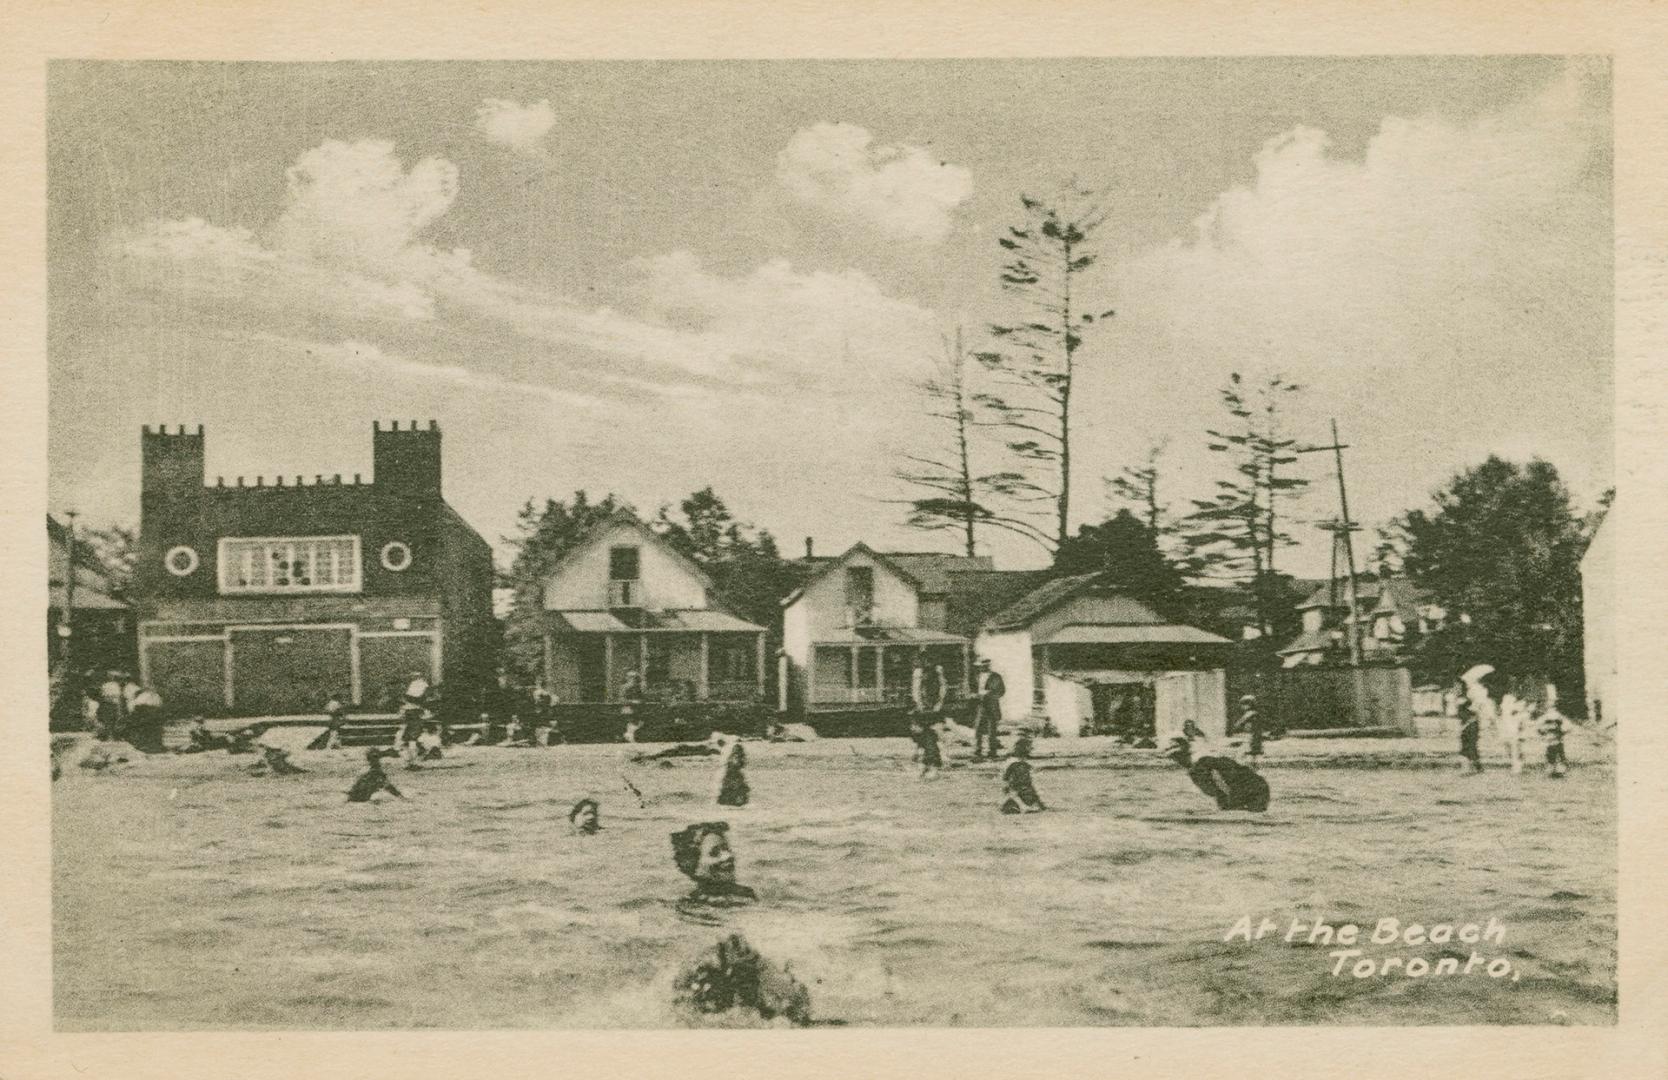 Black and white picture of people swimming in water with arcade buildings on the shoreline.